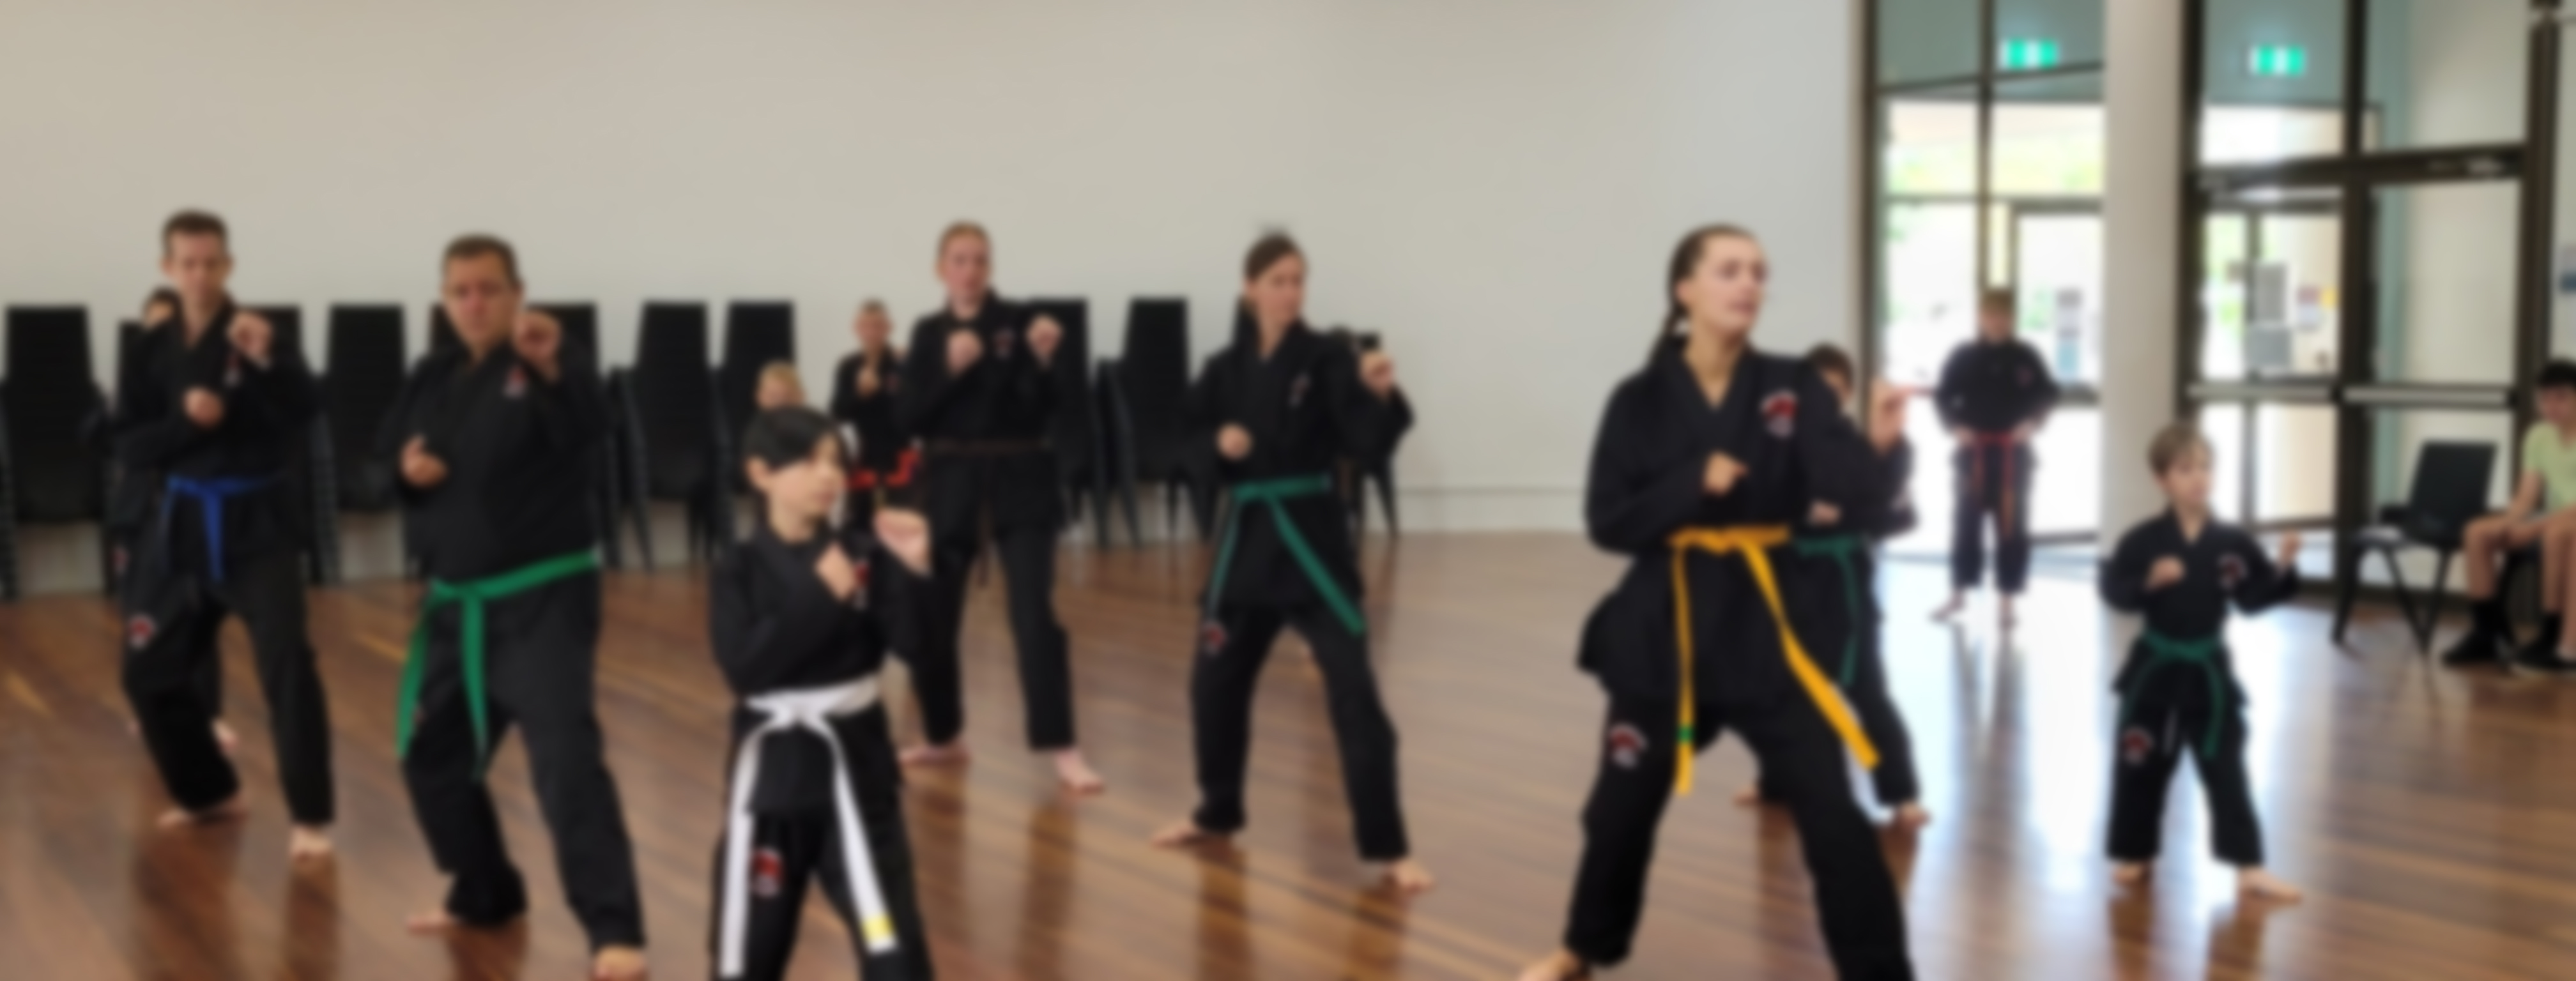 people practicing martial arts